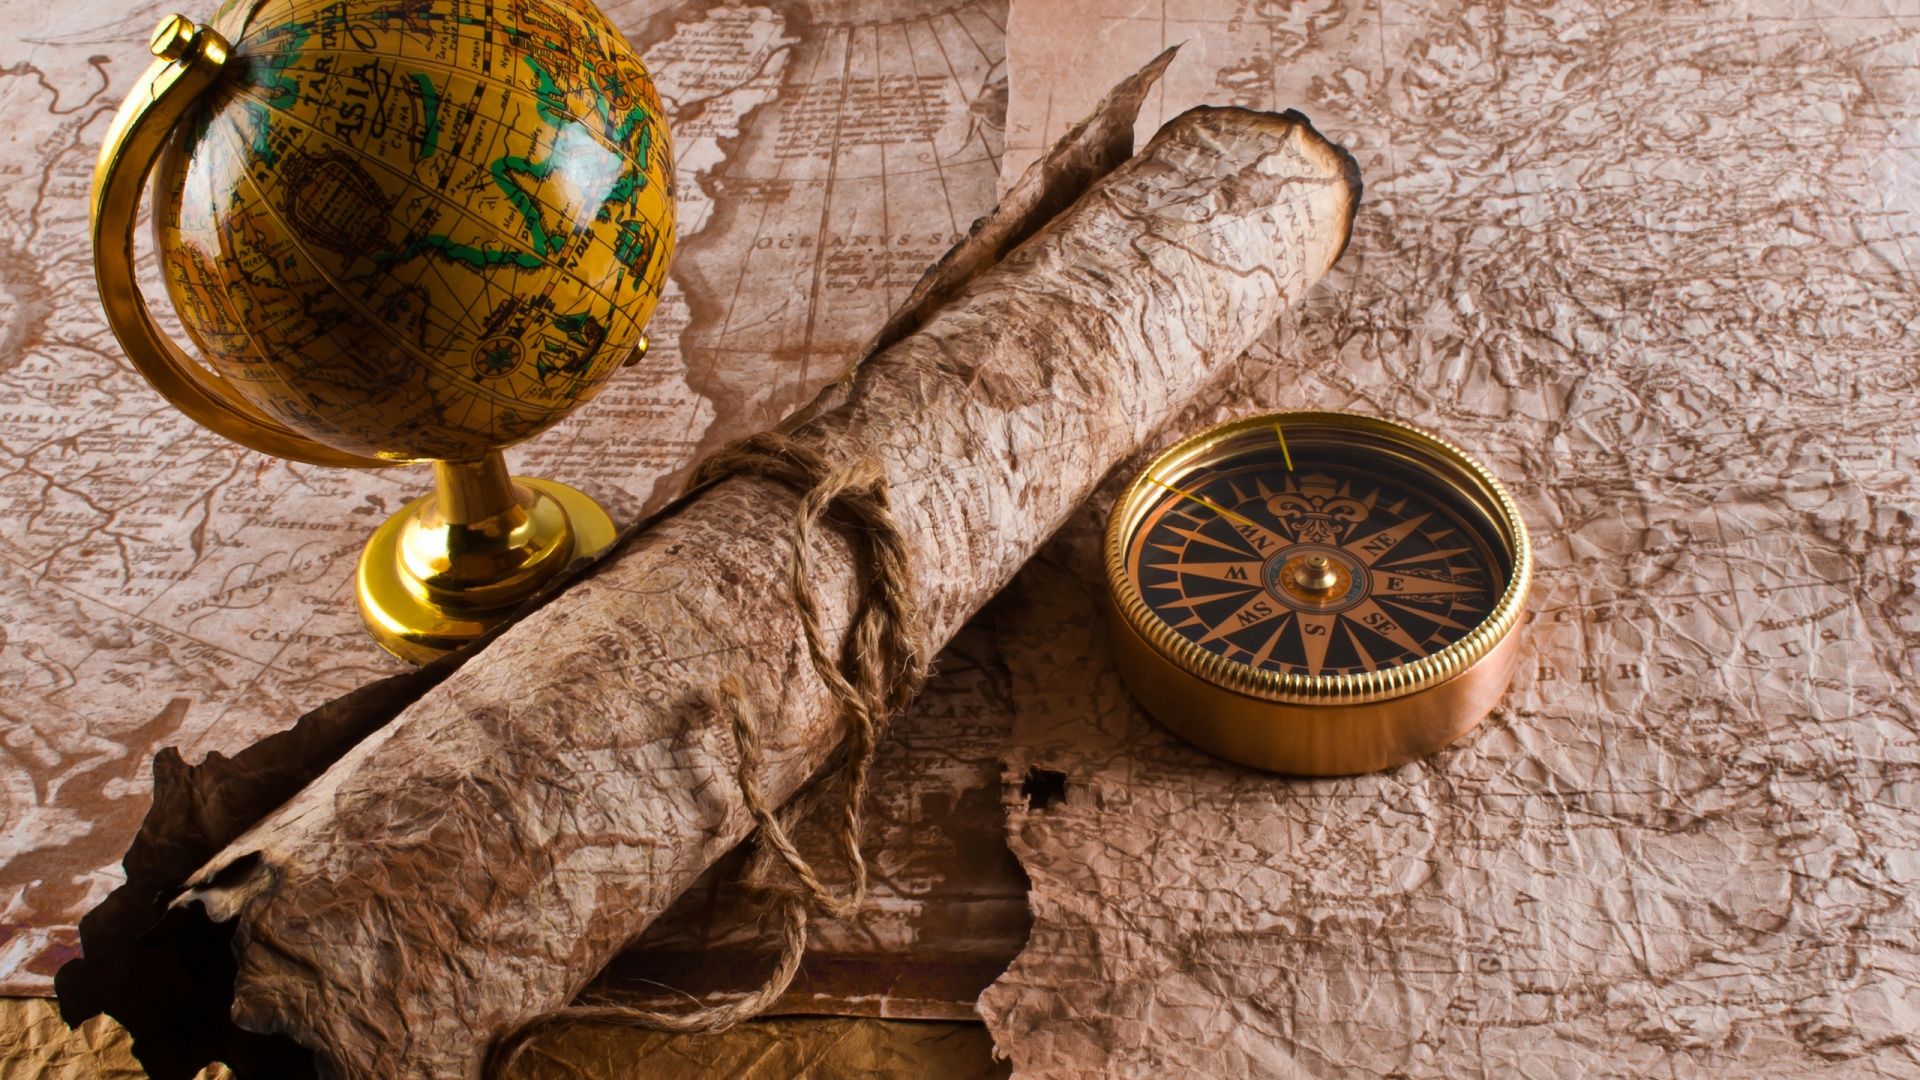 World Map Background Free Download